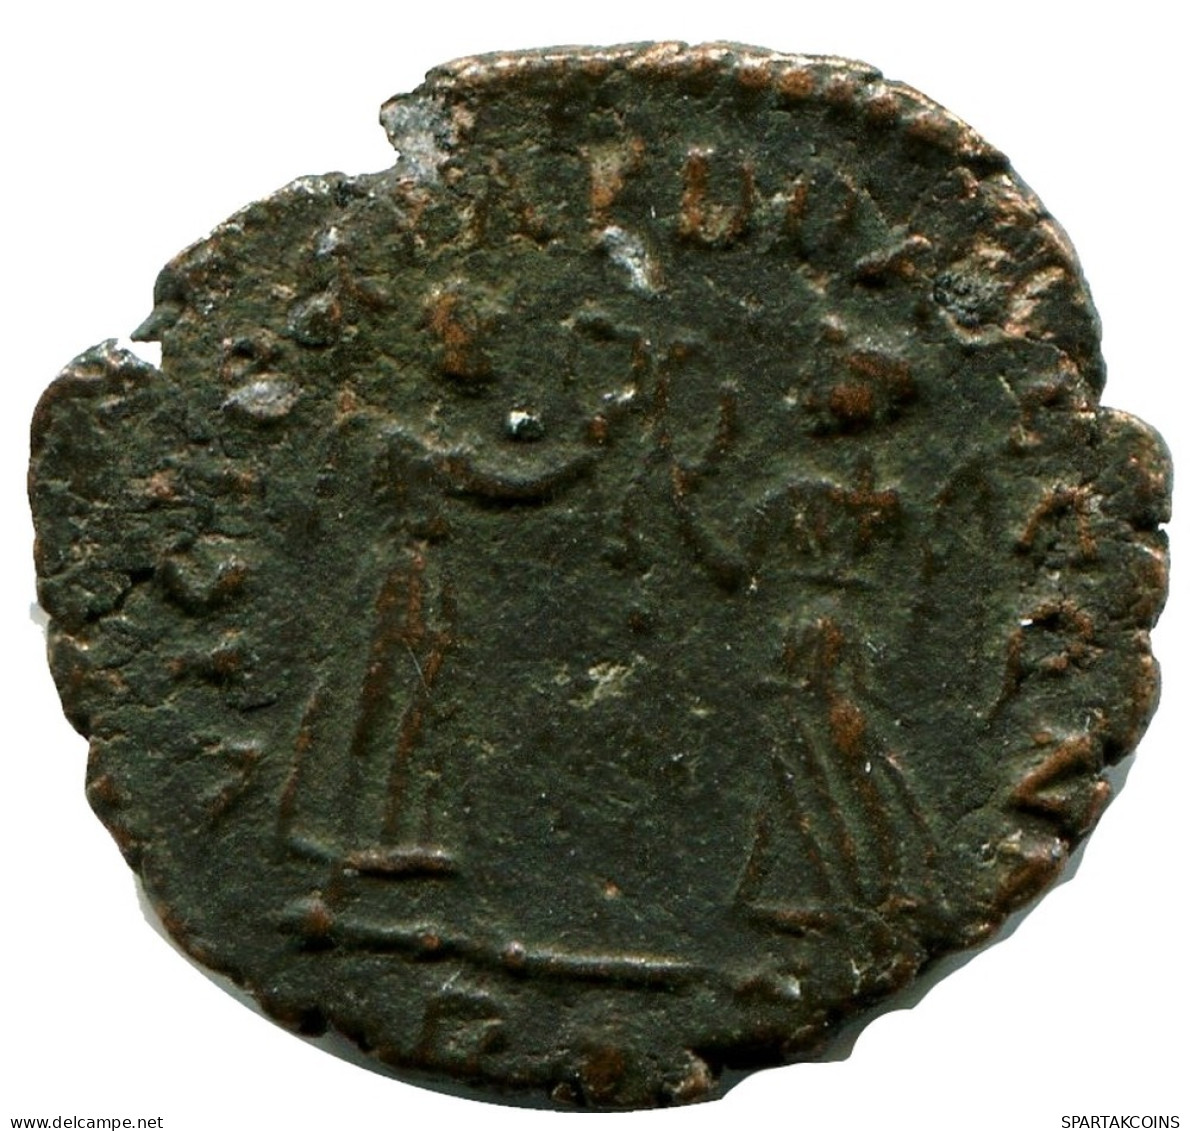 CONSTANS MINTED IN ROME ITALY FOUND IN IHNASYAH HOARD EGYPT #ANC11506.14.F.A - El Imperio Christiano (307 / 363)